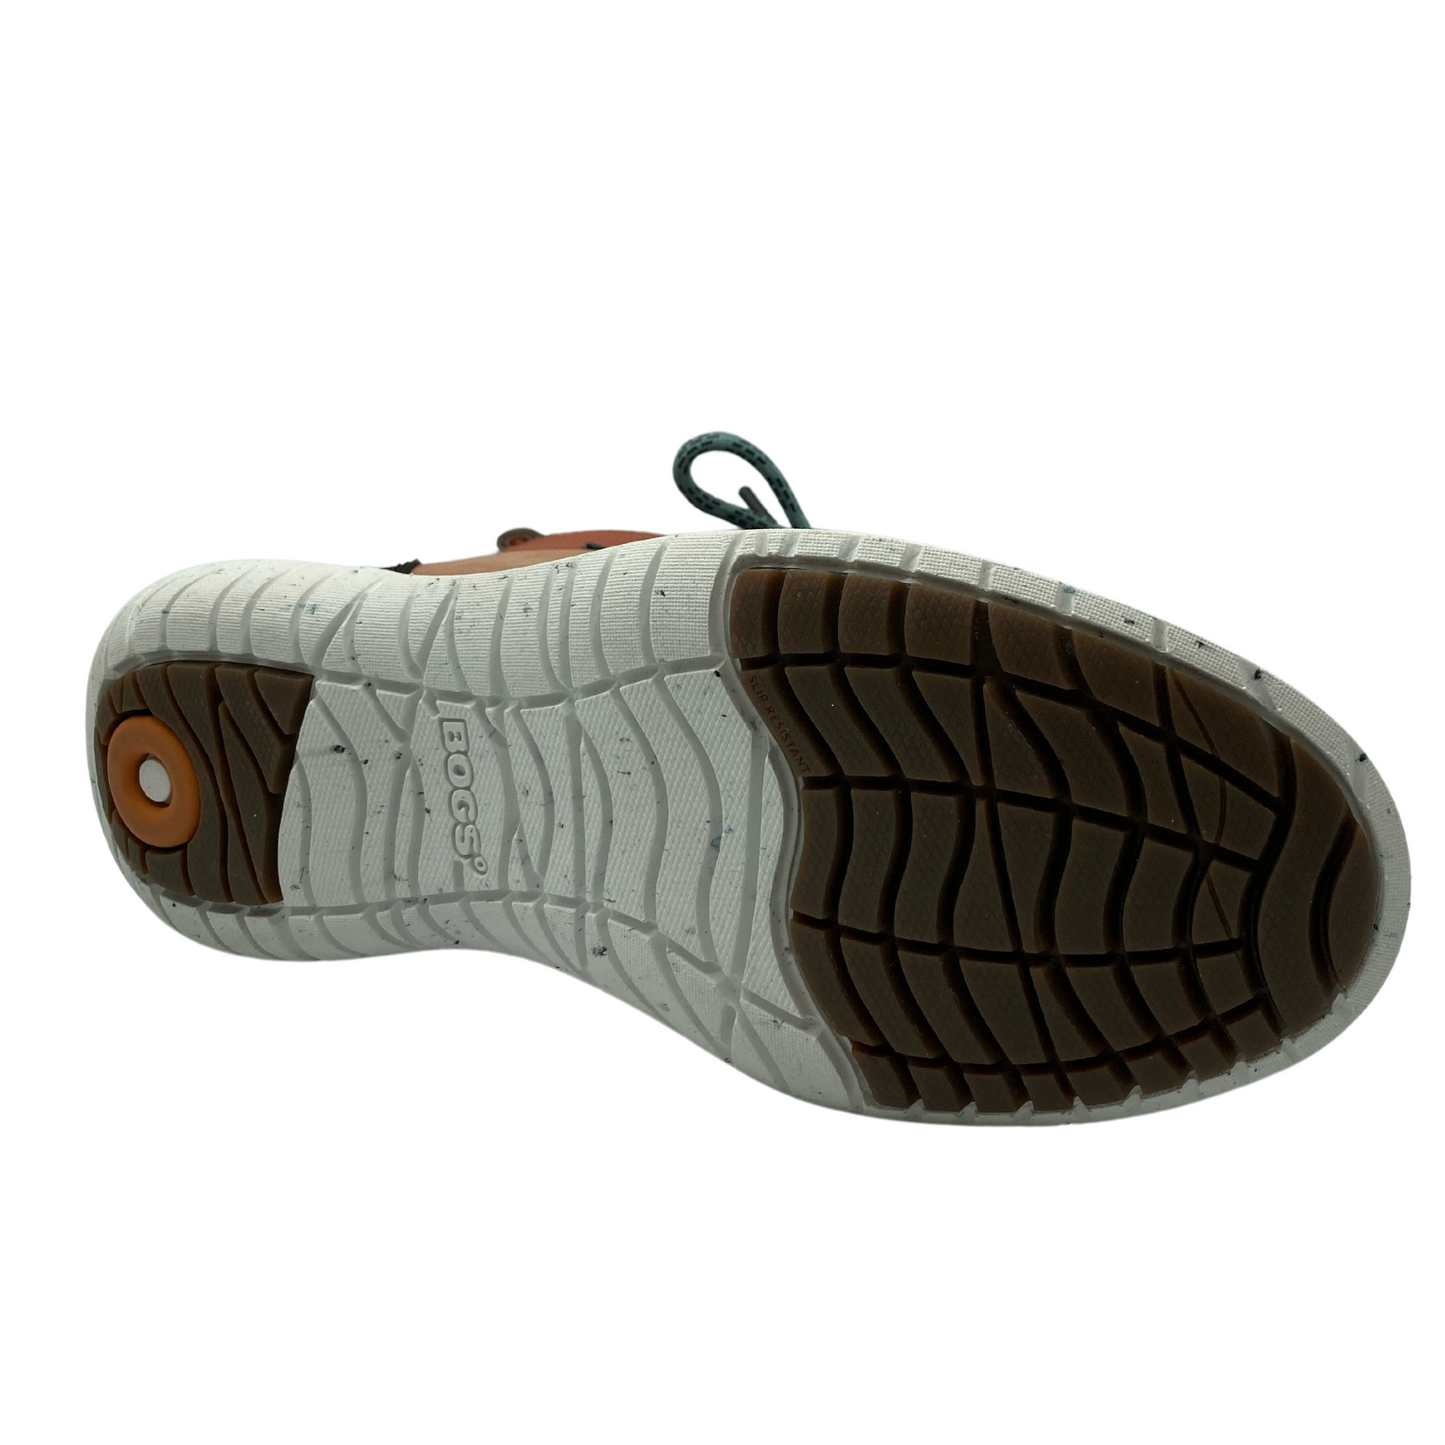 Bottom view of waterproof hiking boot with white and brown rubber outsole